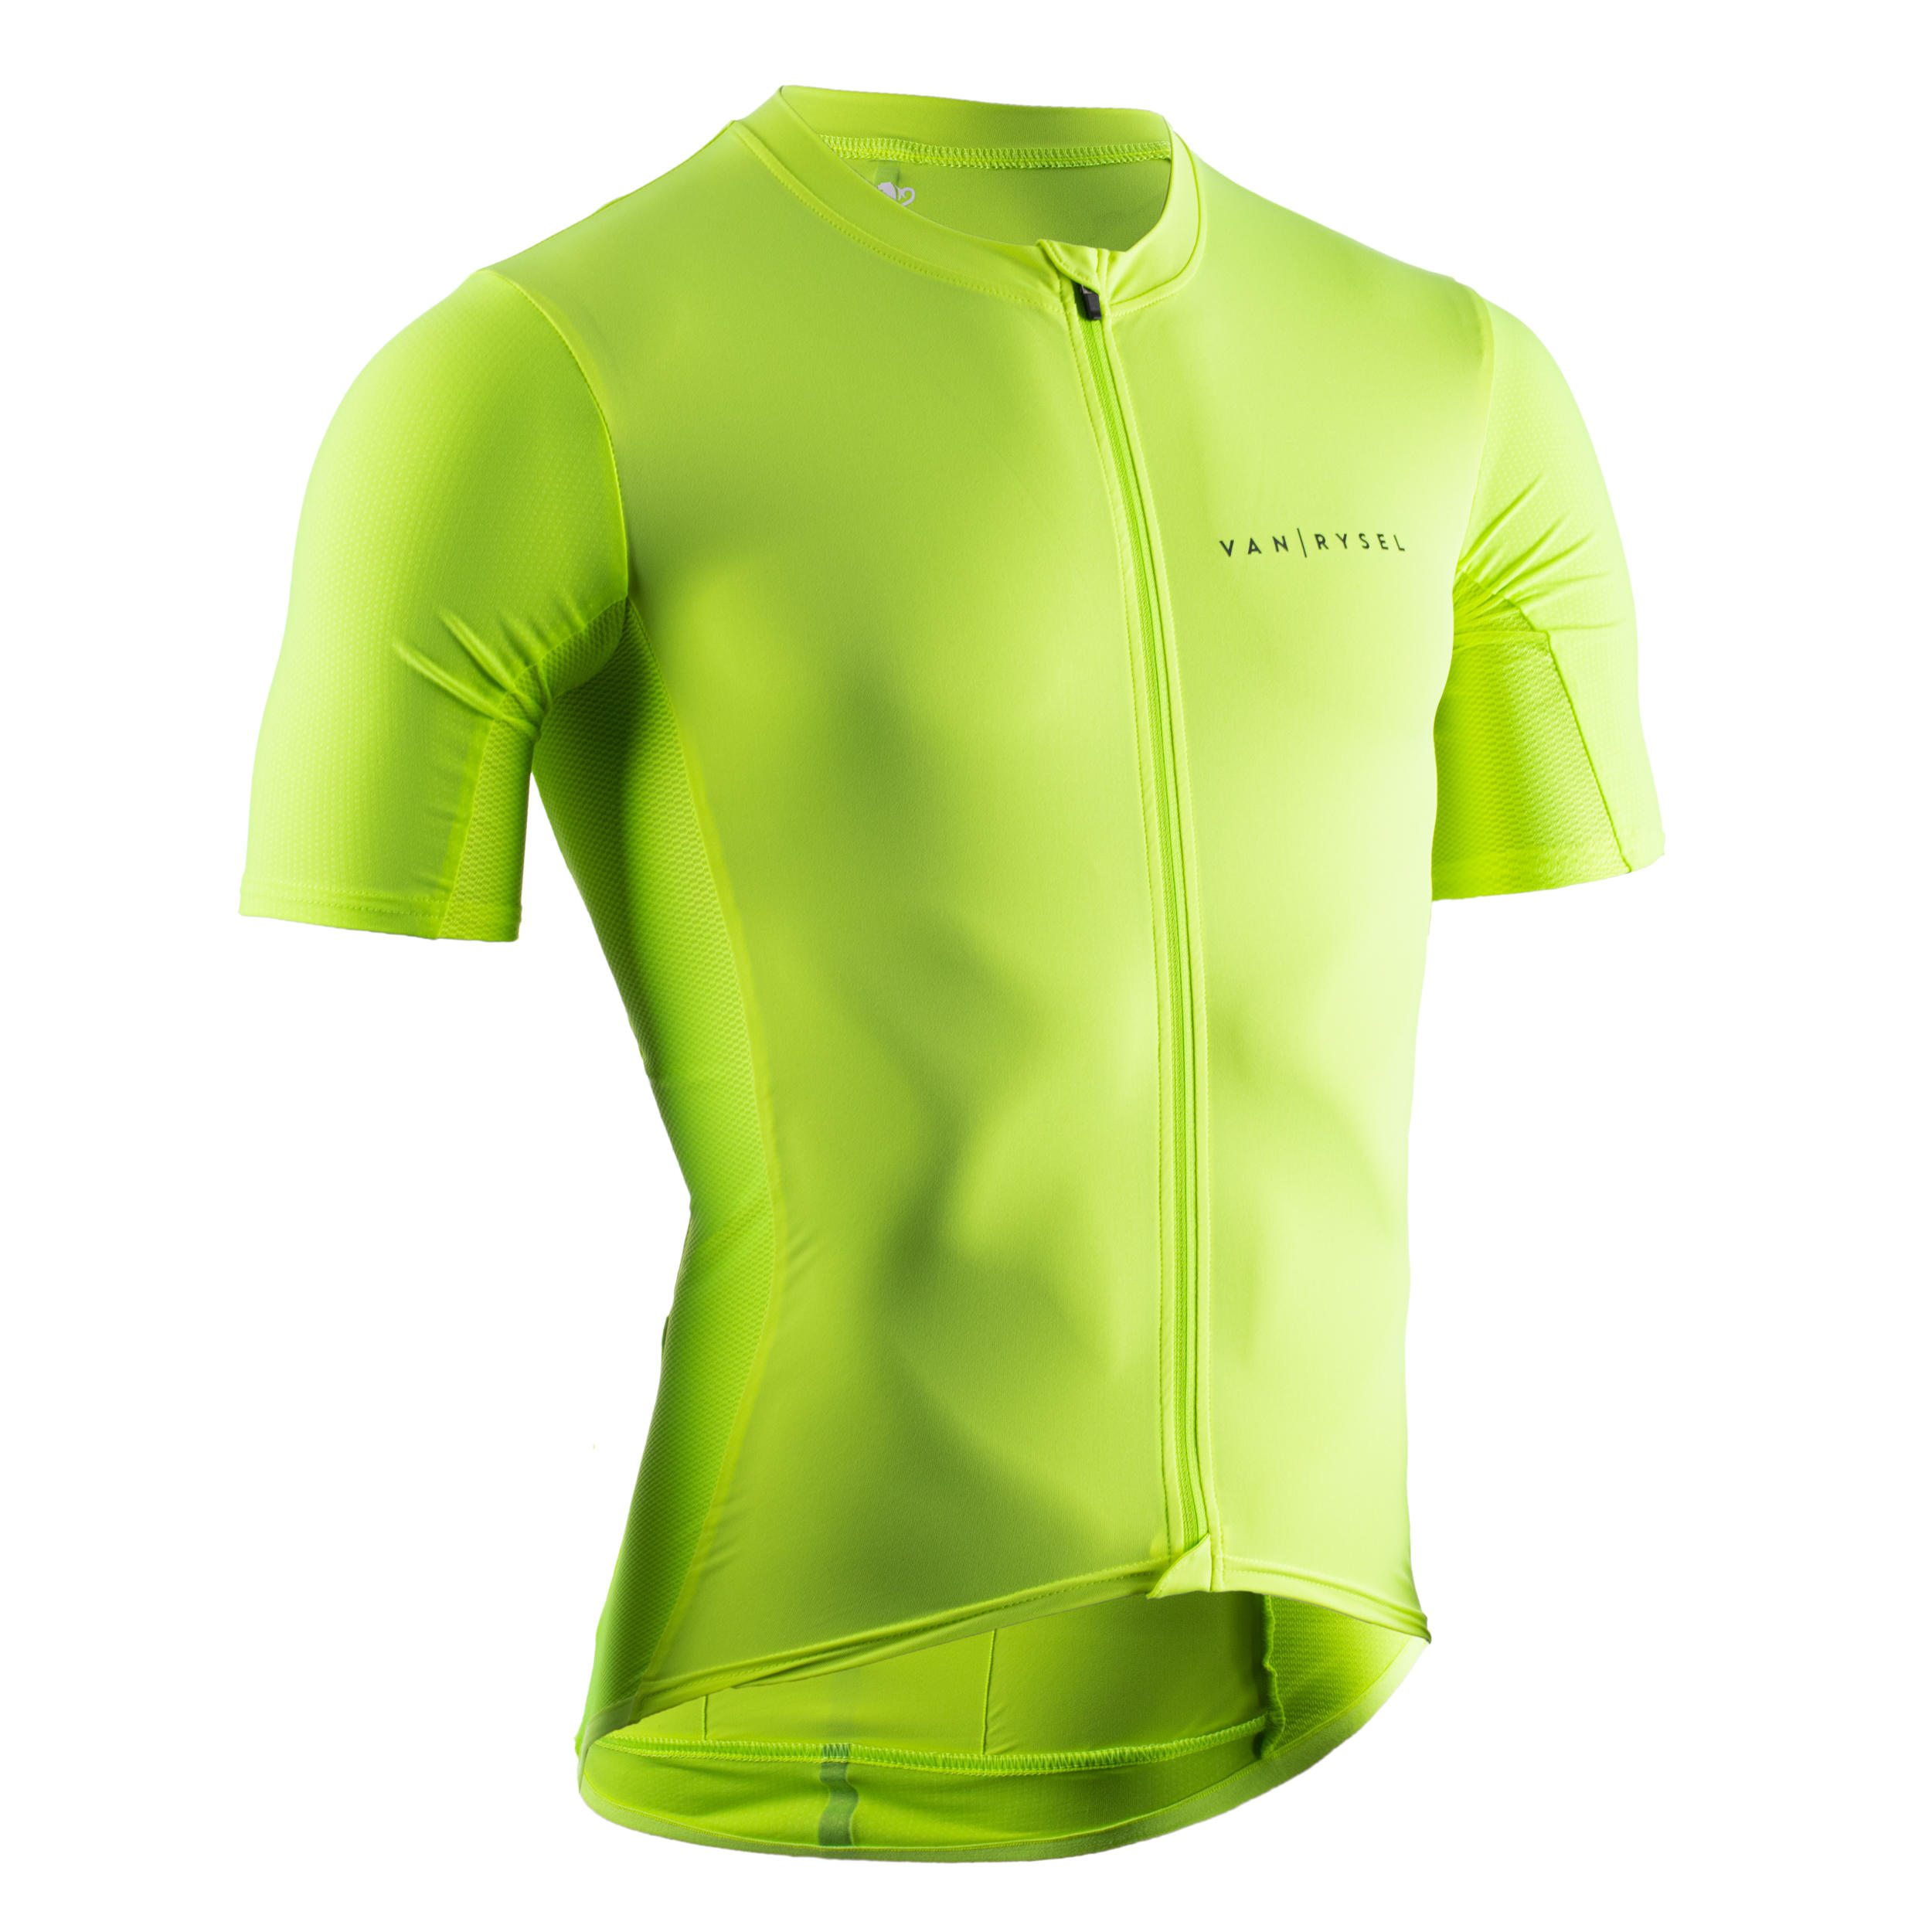 Image of Neo Racer Road Cycling Jersey - Men